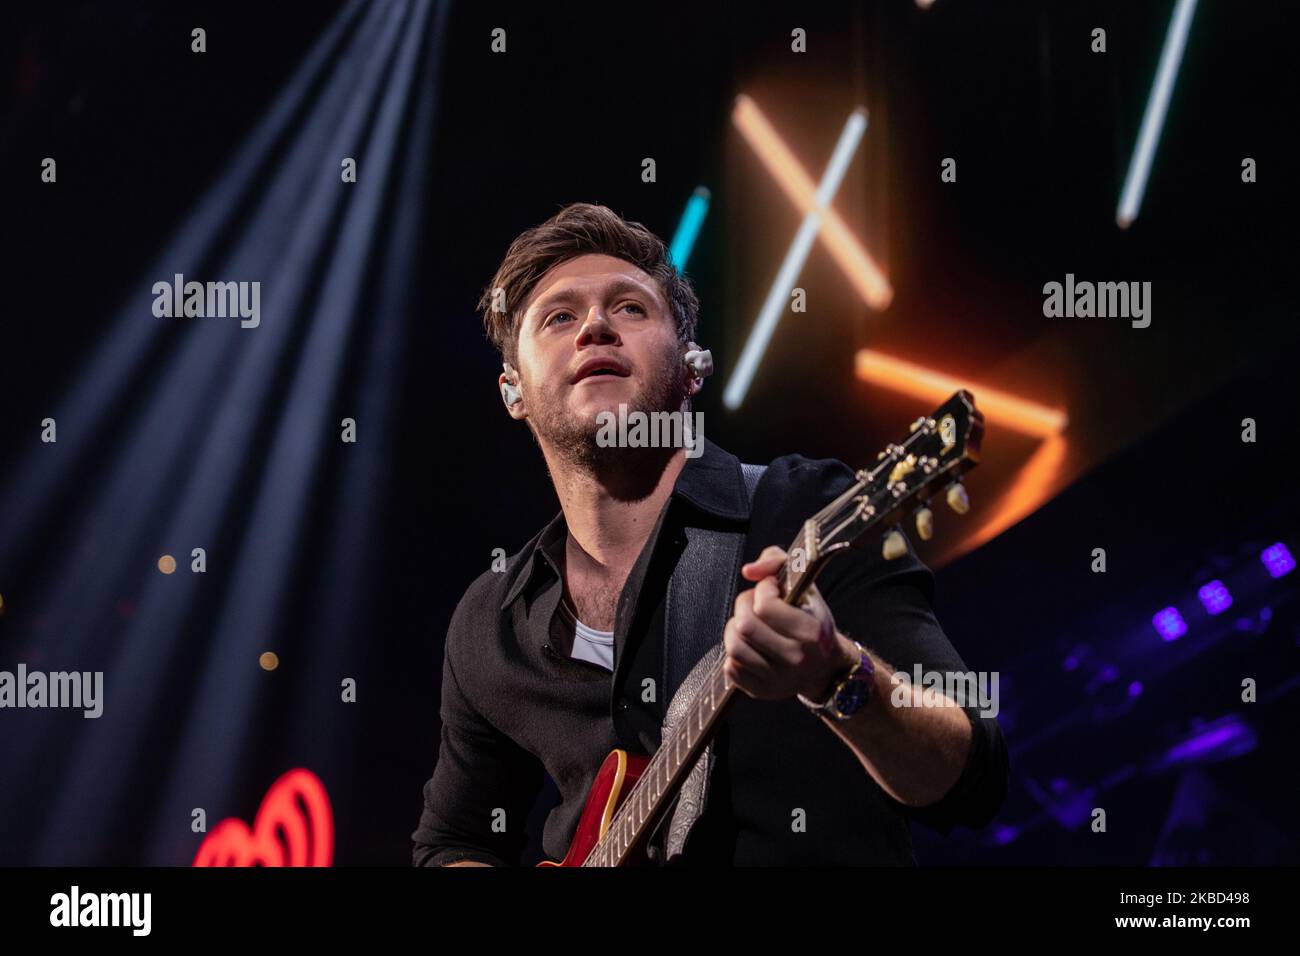 Niall Horan performs during 99.5's iHeartRadio Jingle Ball 2019 at Capital One Arena in Washington, D.C. on Monday, December 16, 2019. (Photo by Cheriss May) (Photo by Cheriss May/NurPhoto) Stock Photo